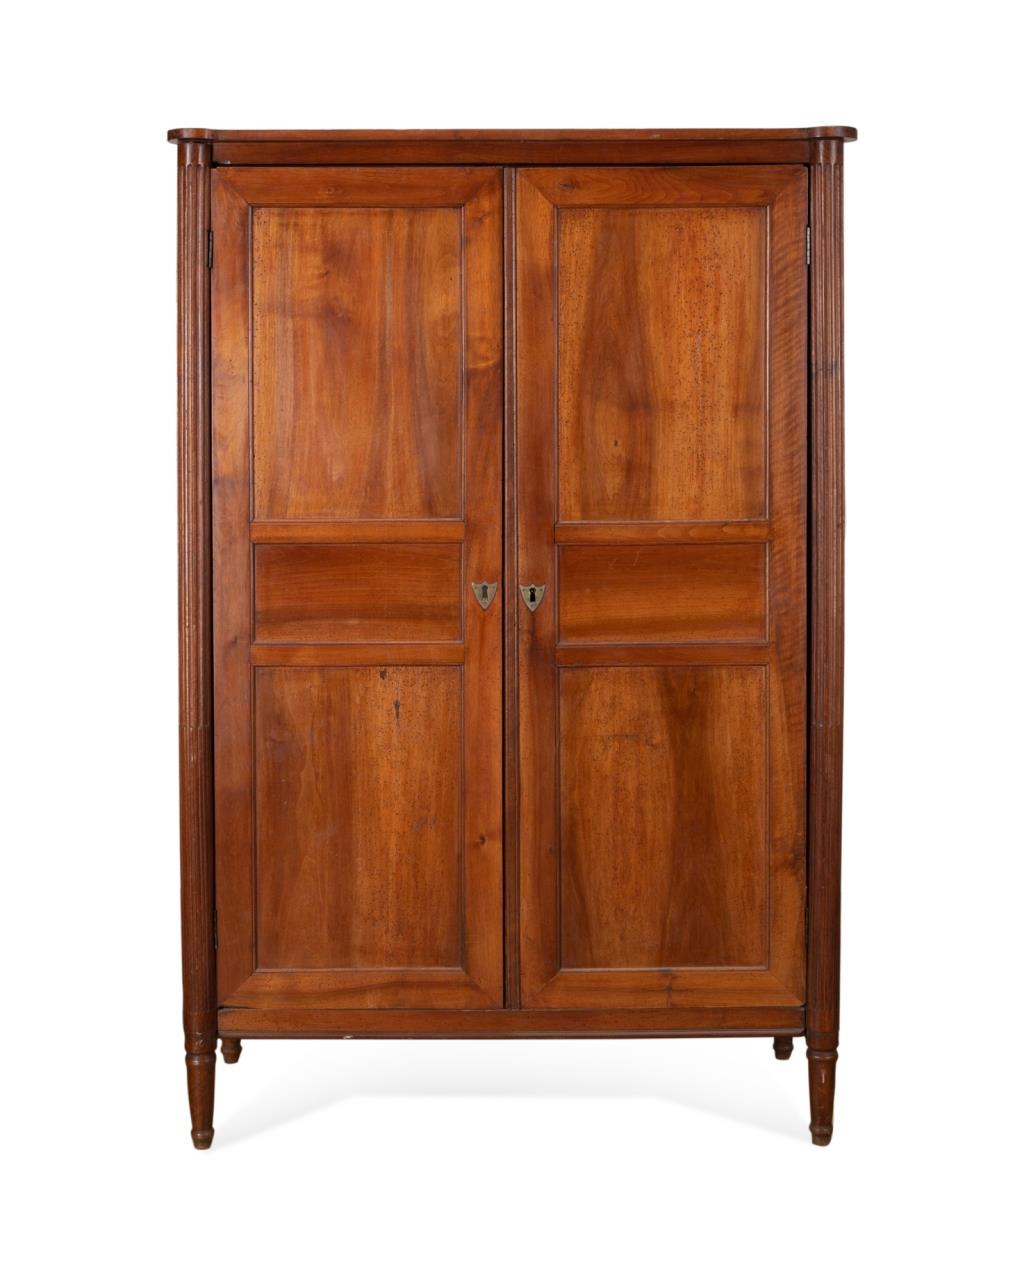 FRENCH EMPIRE STYLE WALNUT ARMOIRE 2fa4d4